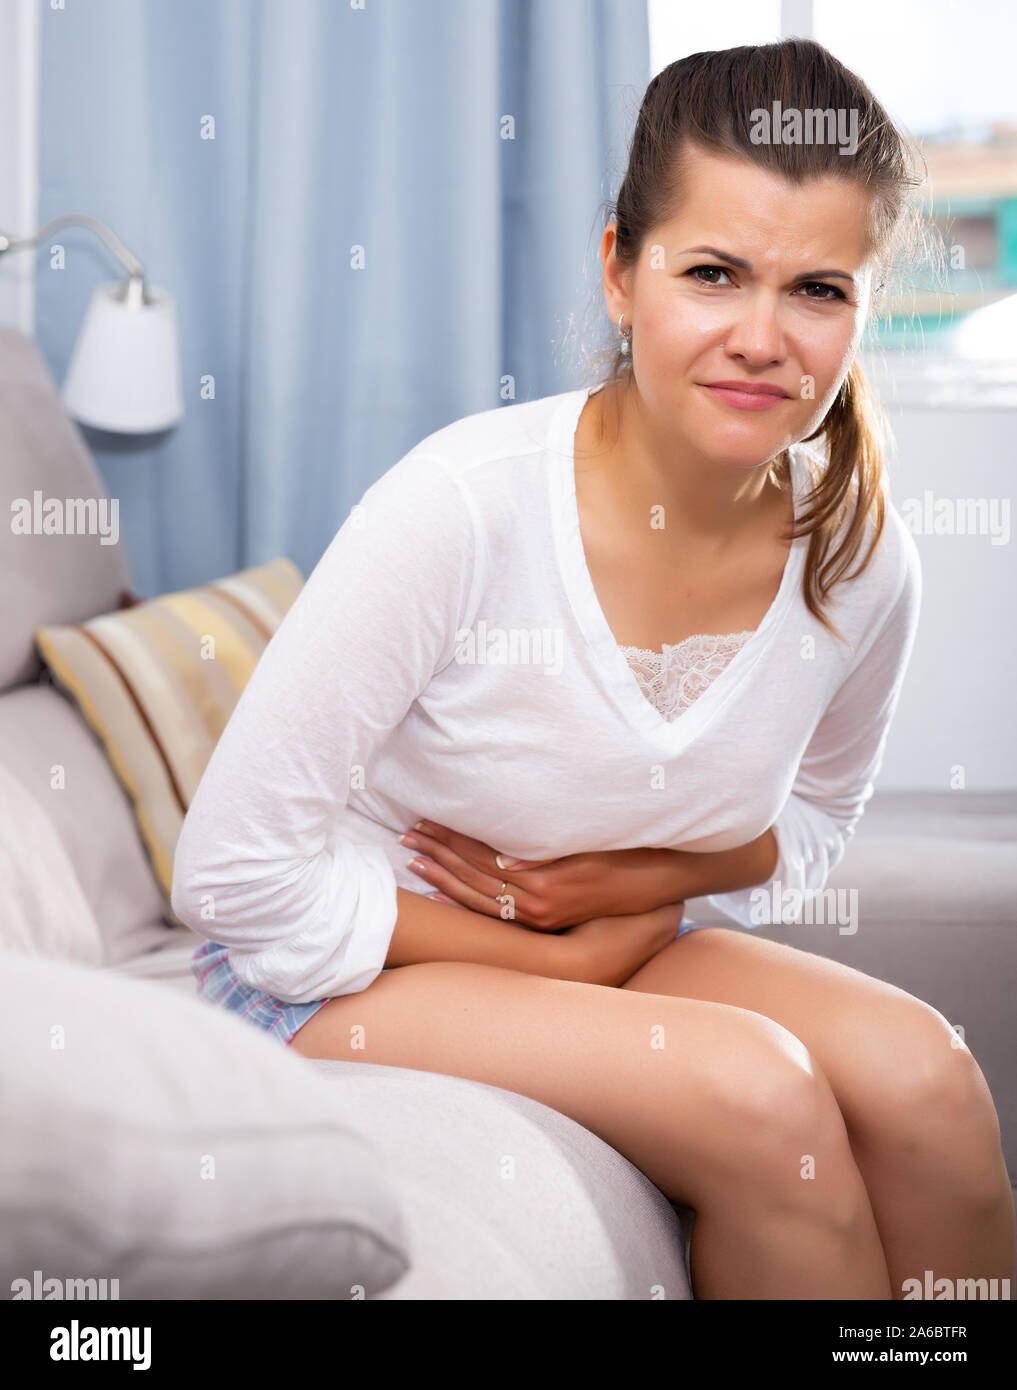 Young brunette suffering from abdominal pain, sitting on couch and holding her stomach with hands Stock Photo